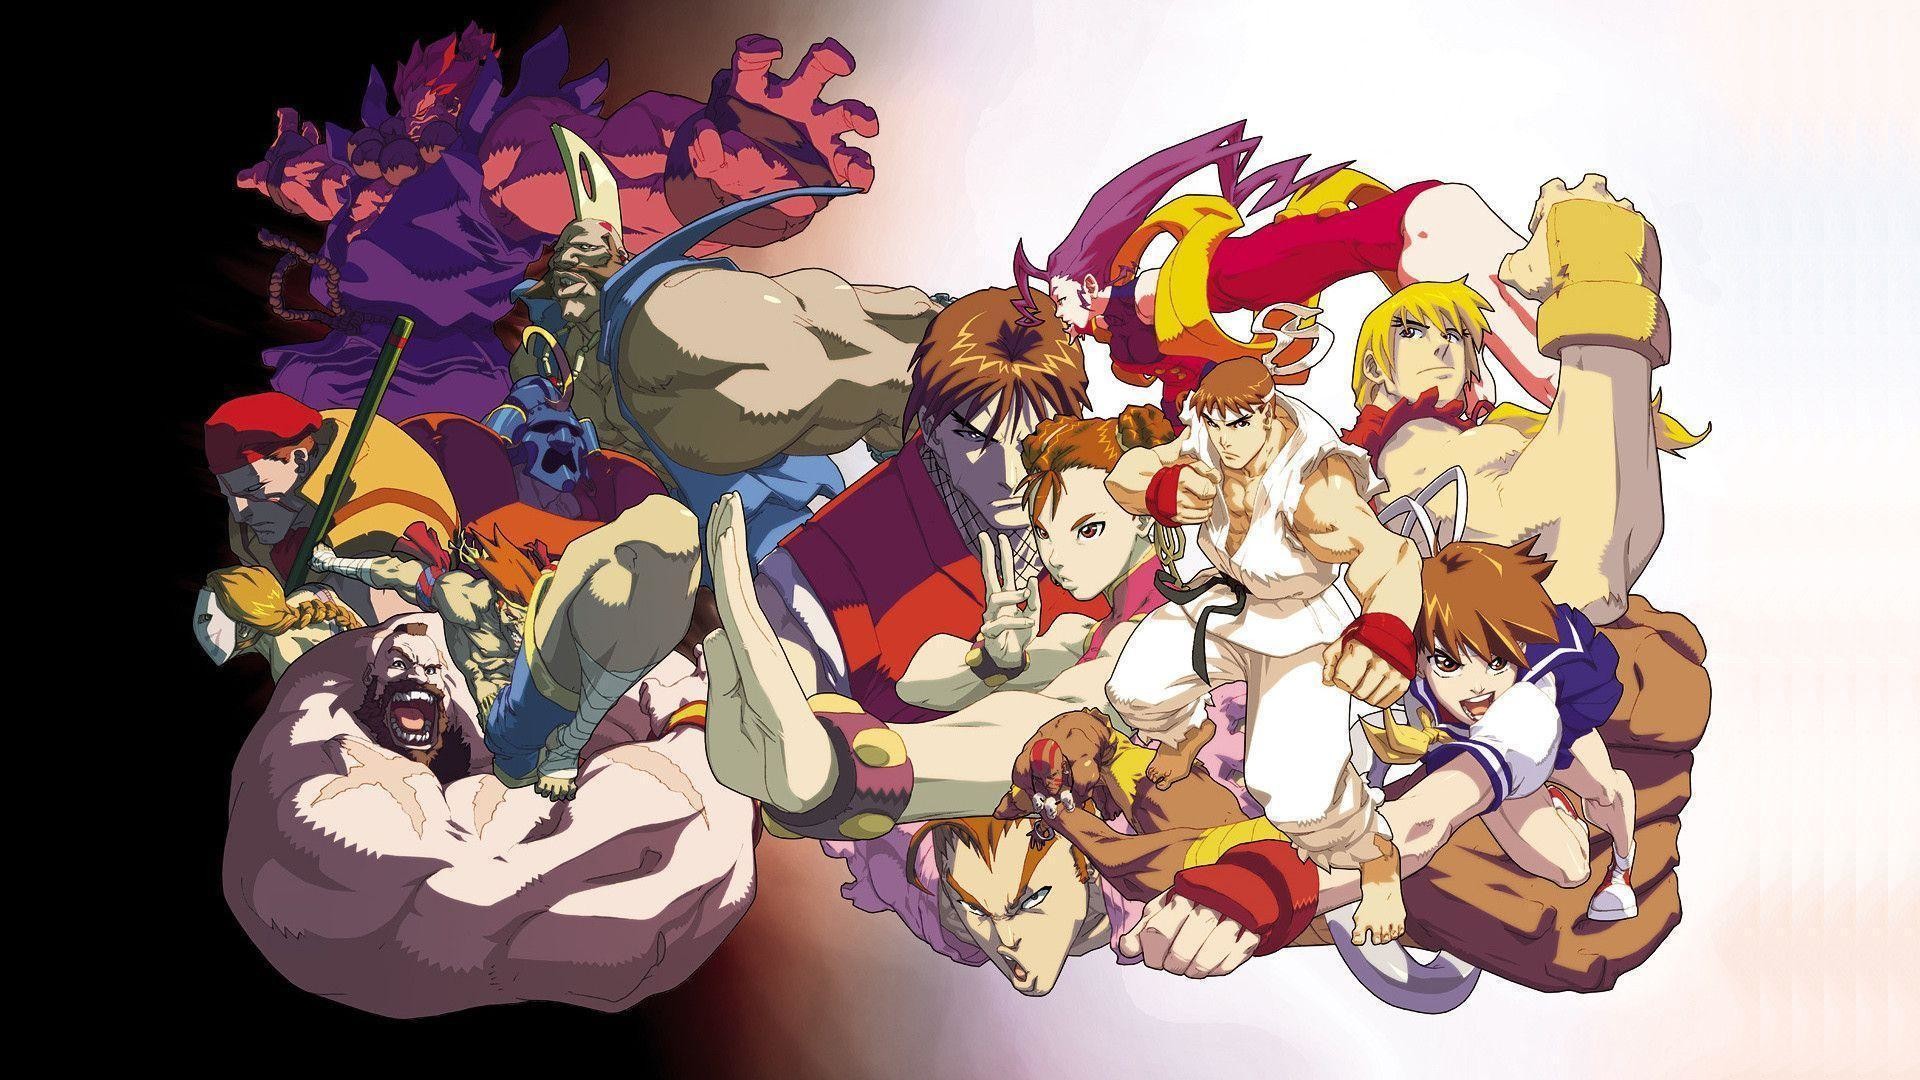 Street Fighter 4 HD Wallpapers | Street Fighter 4 Photos | Cool .